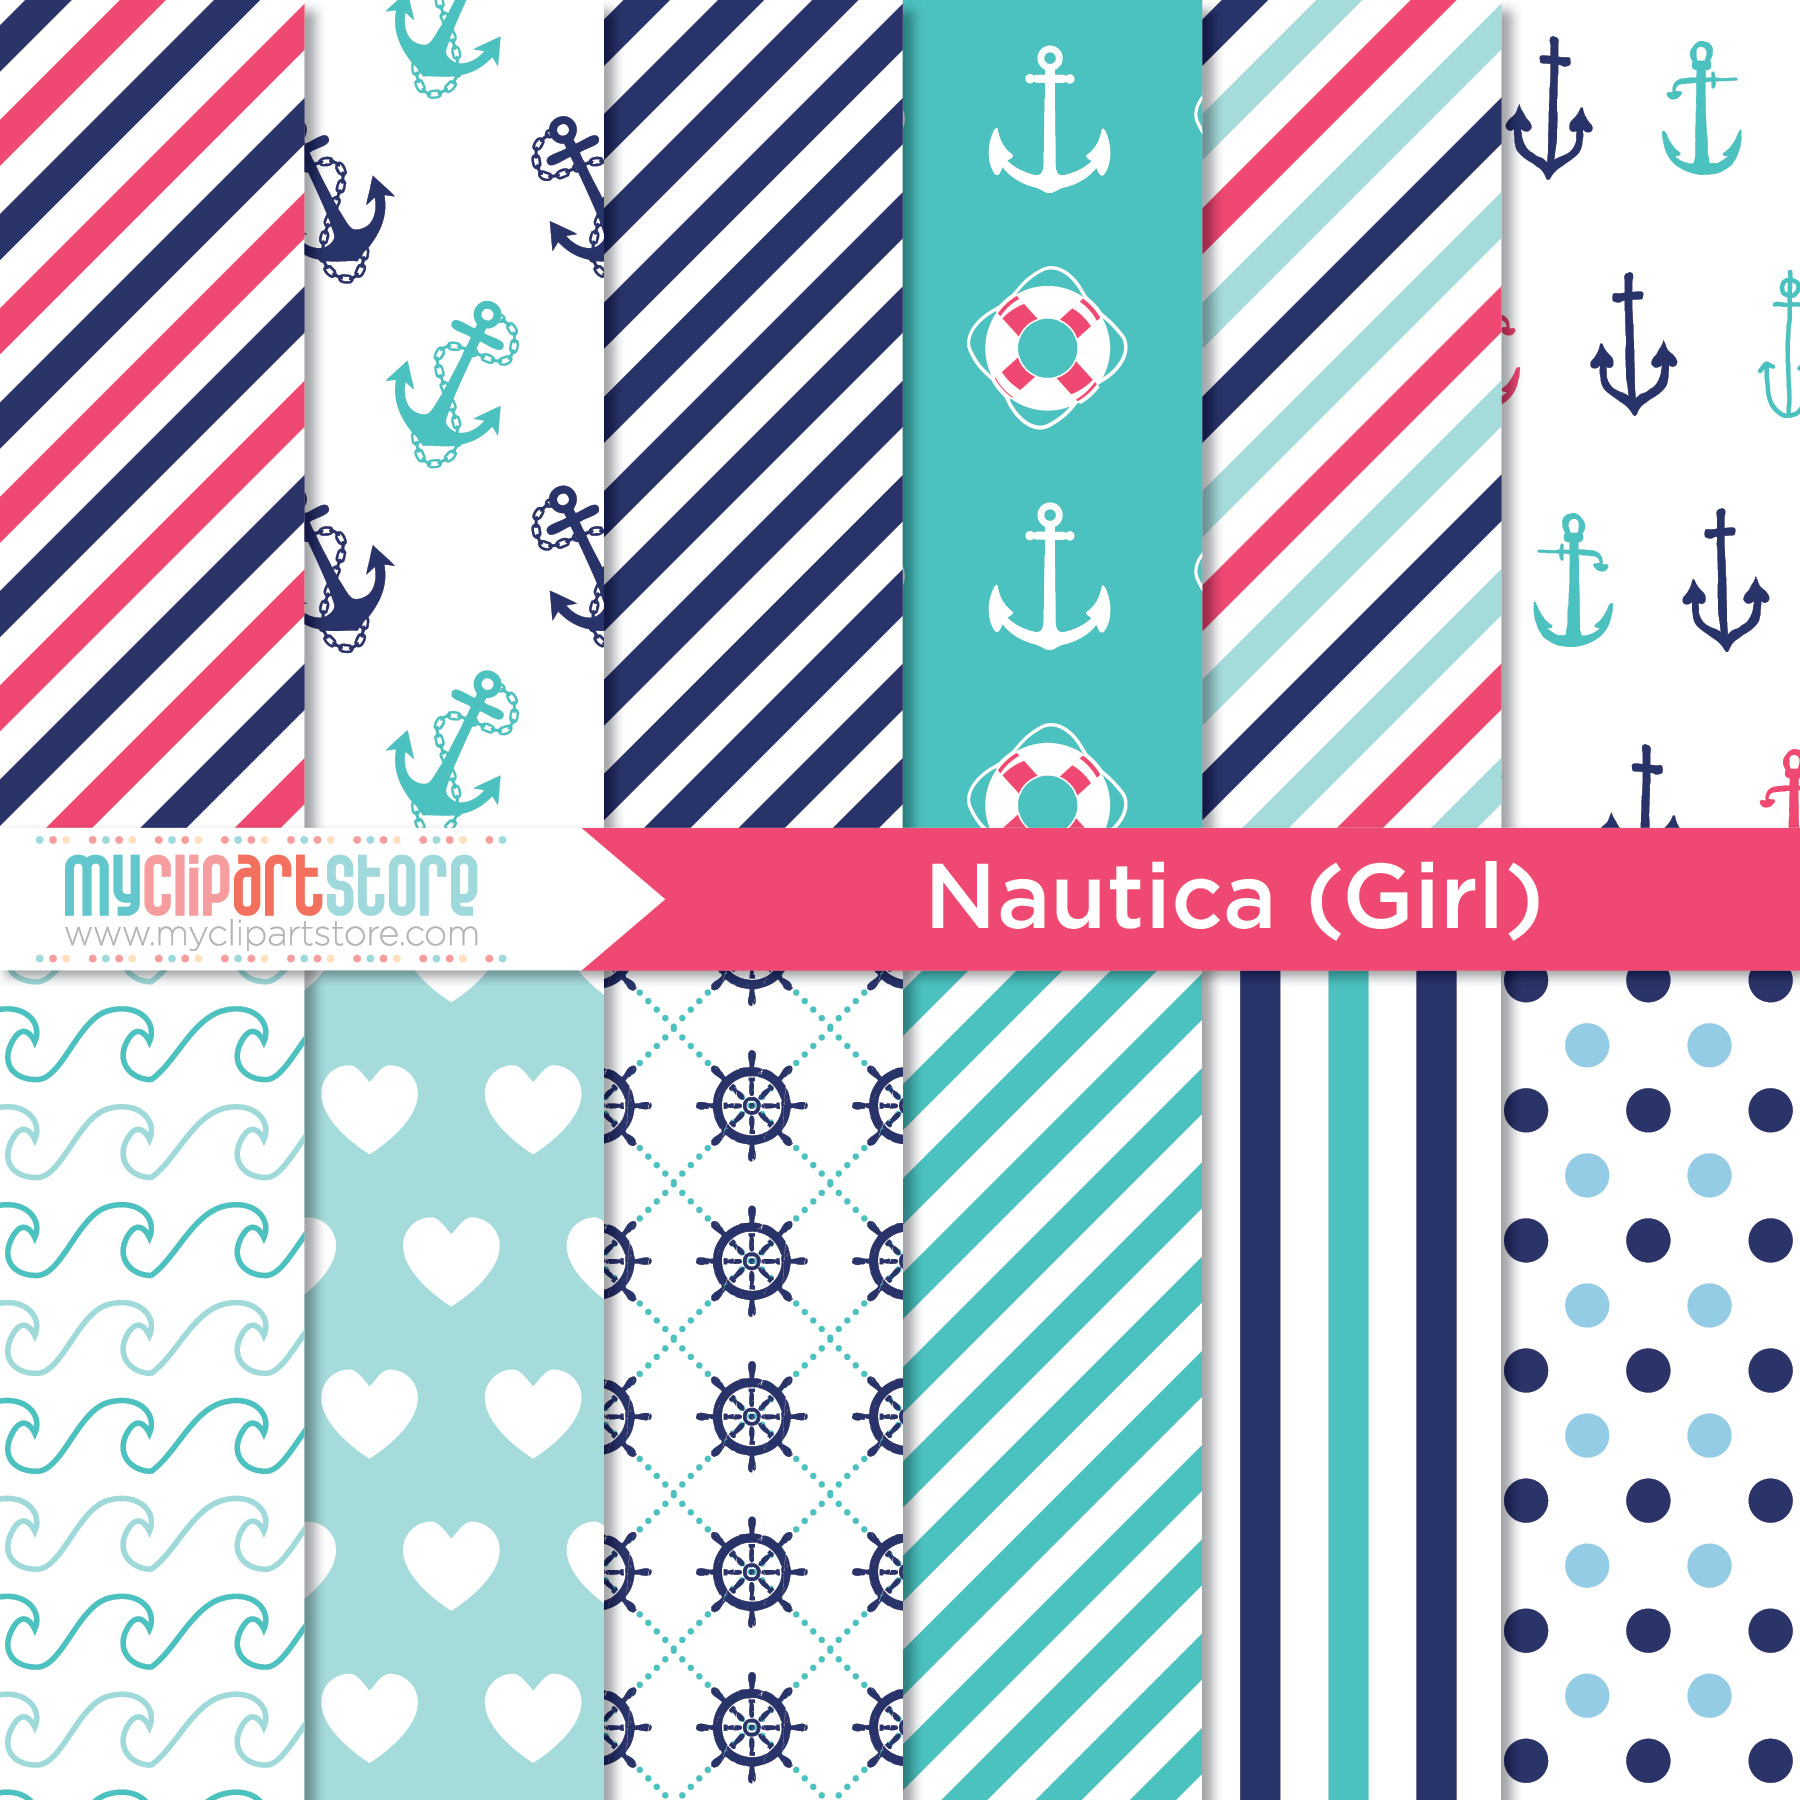 Nautical Embroidery Patterns Nautical Girl Clipart Combo